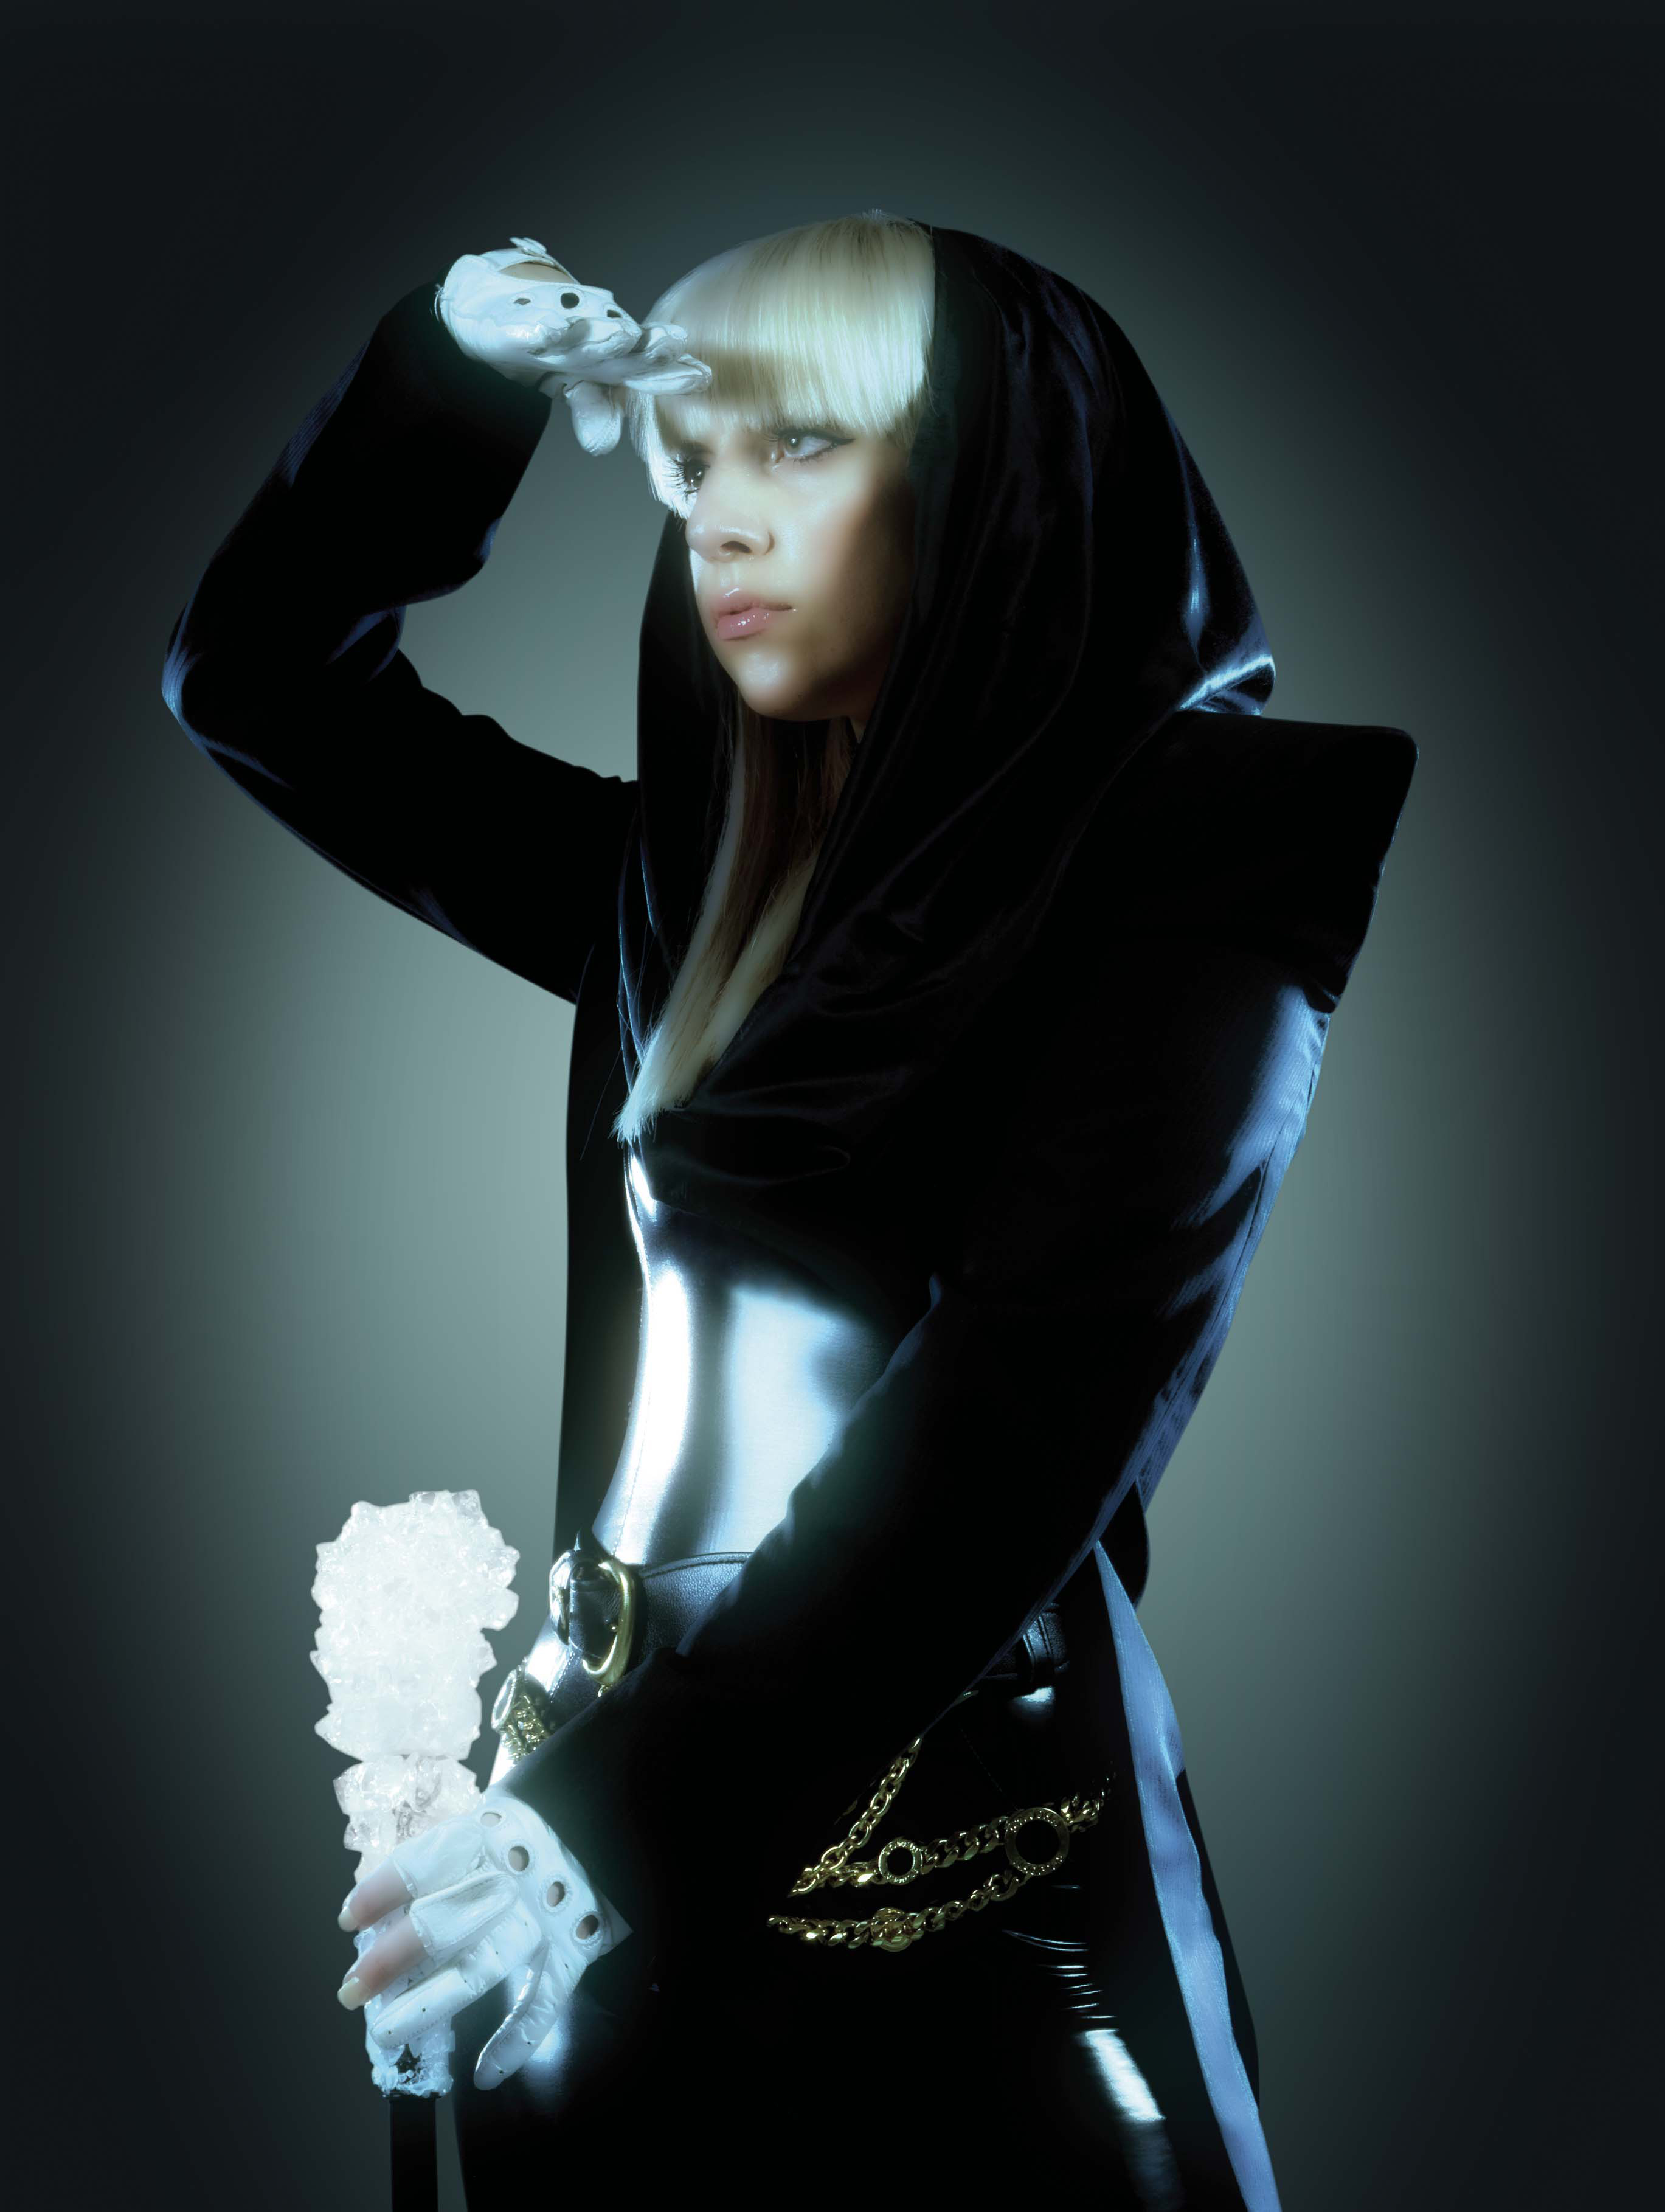 What Is Your Favorite Gaga Photoshoot Gaga Thoughts Gaga Daily 2264